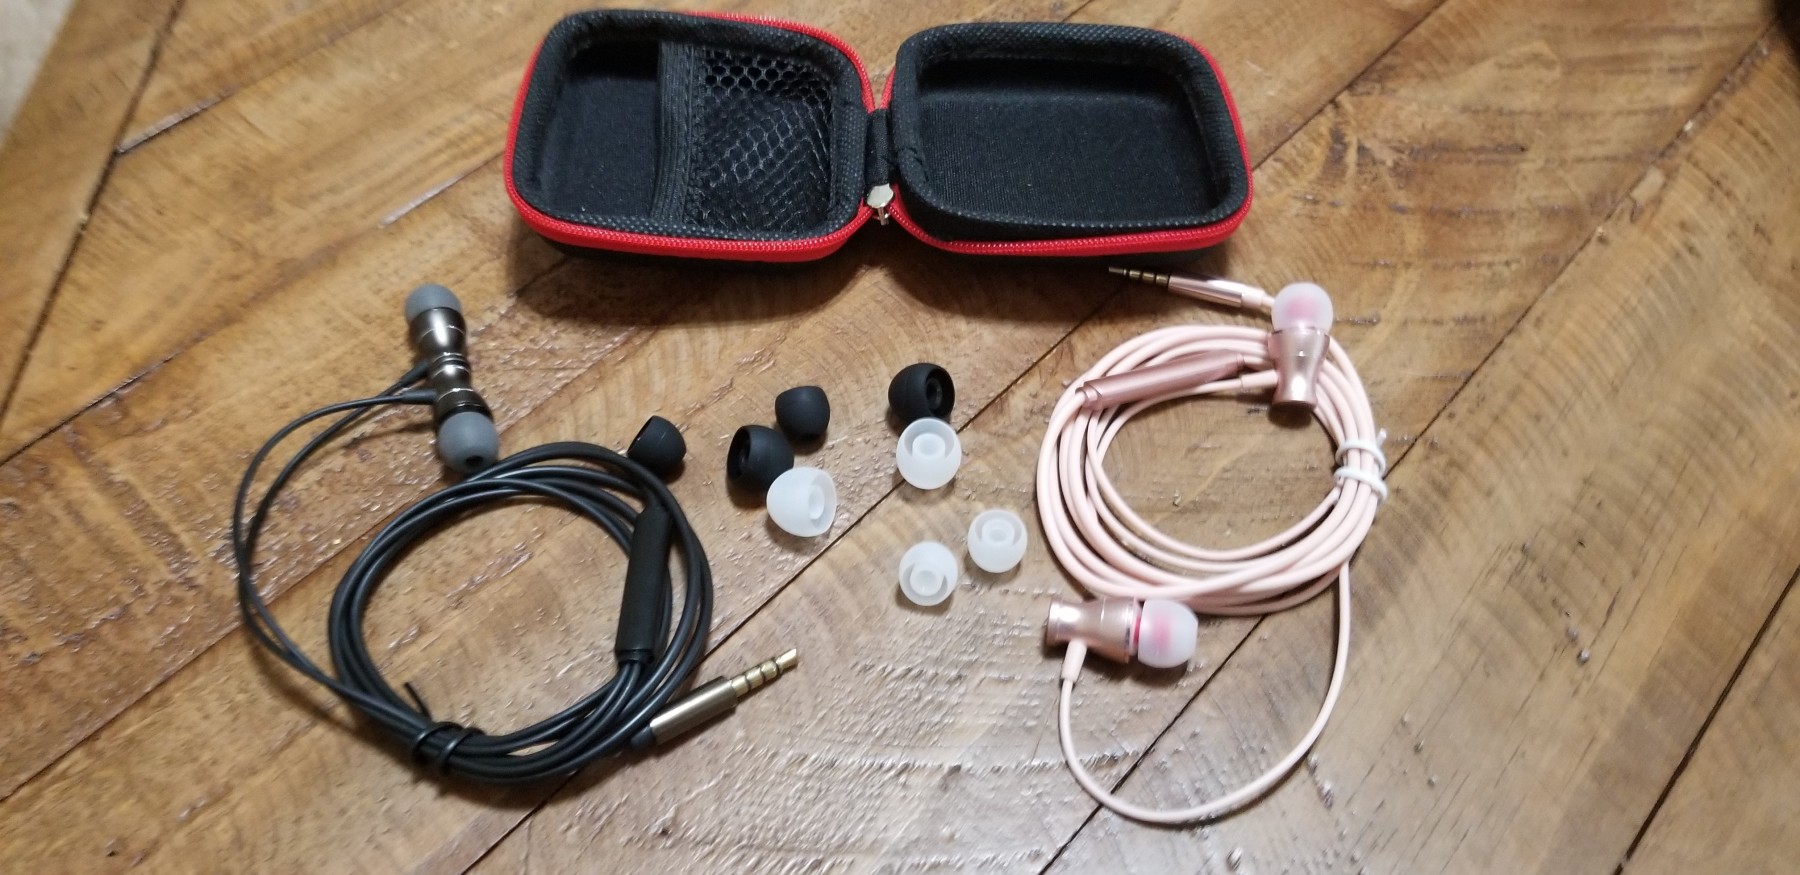 Great set of earbuds with case